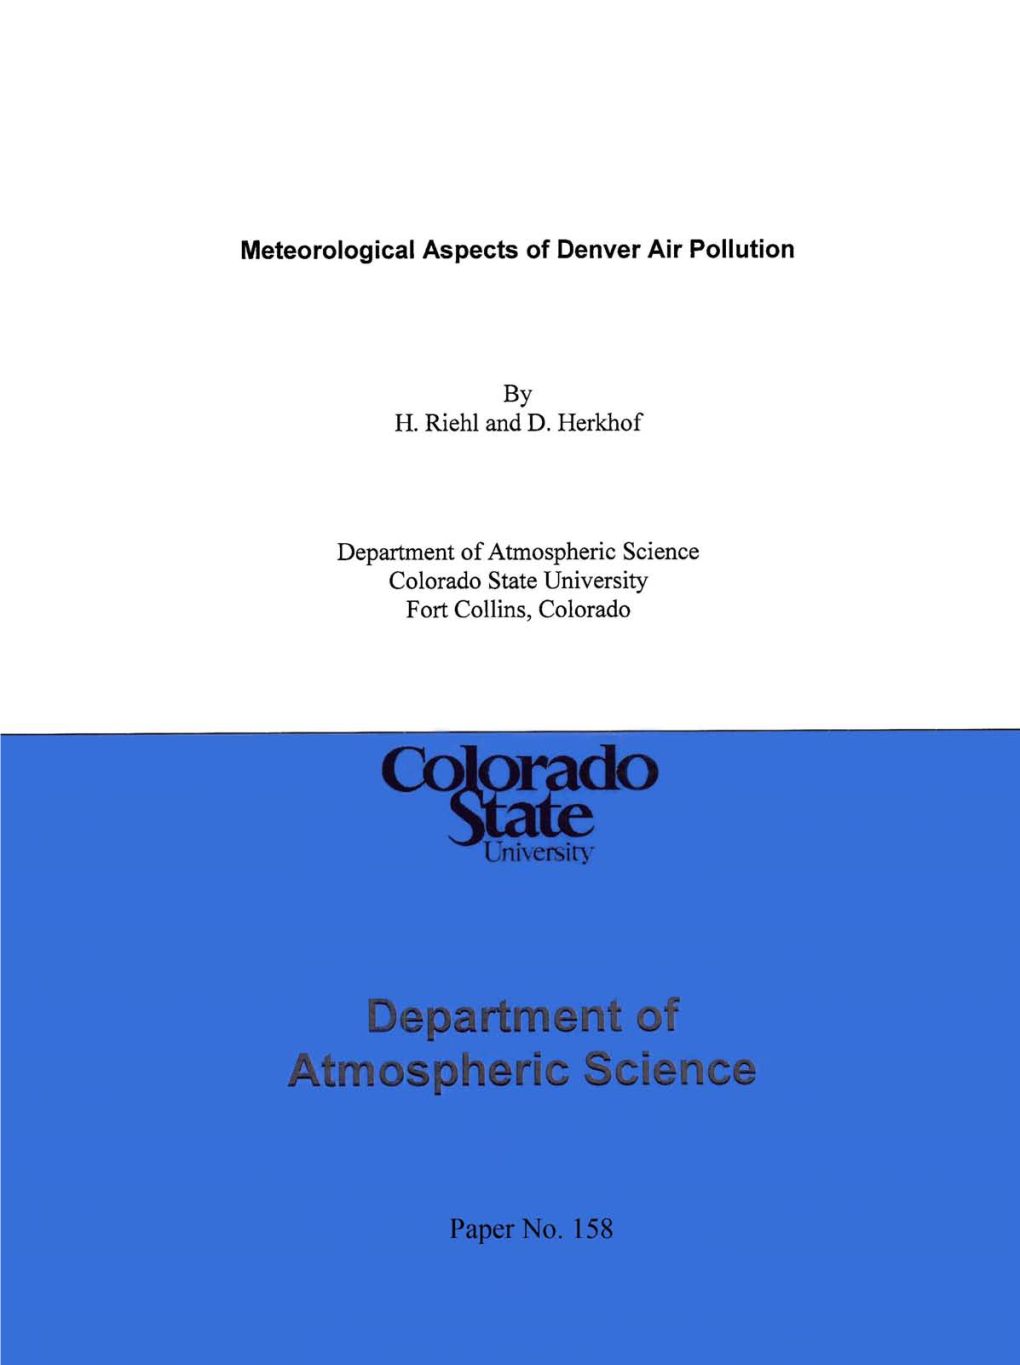 Meteorological Aspects of Denver Air Pollution by H. Riehl and D